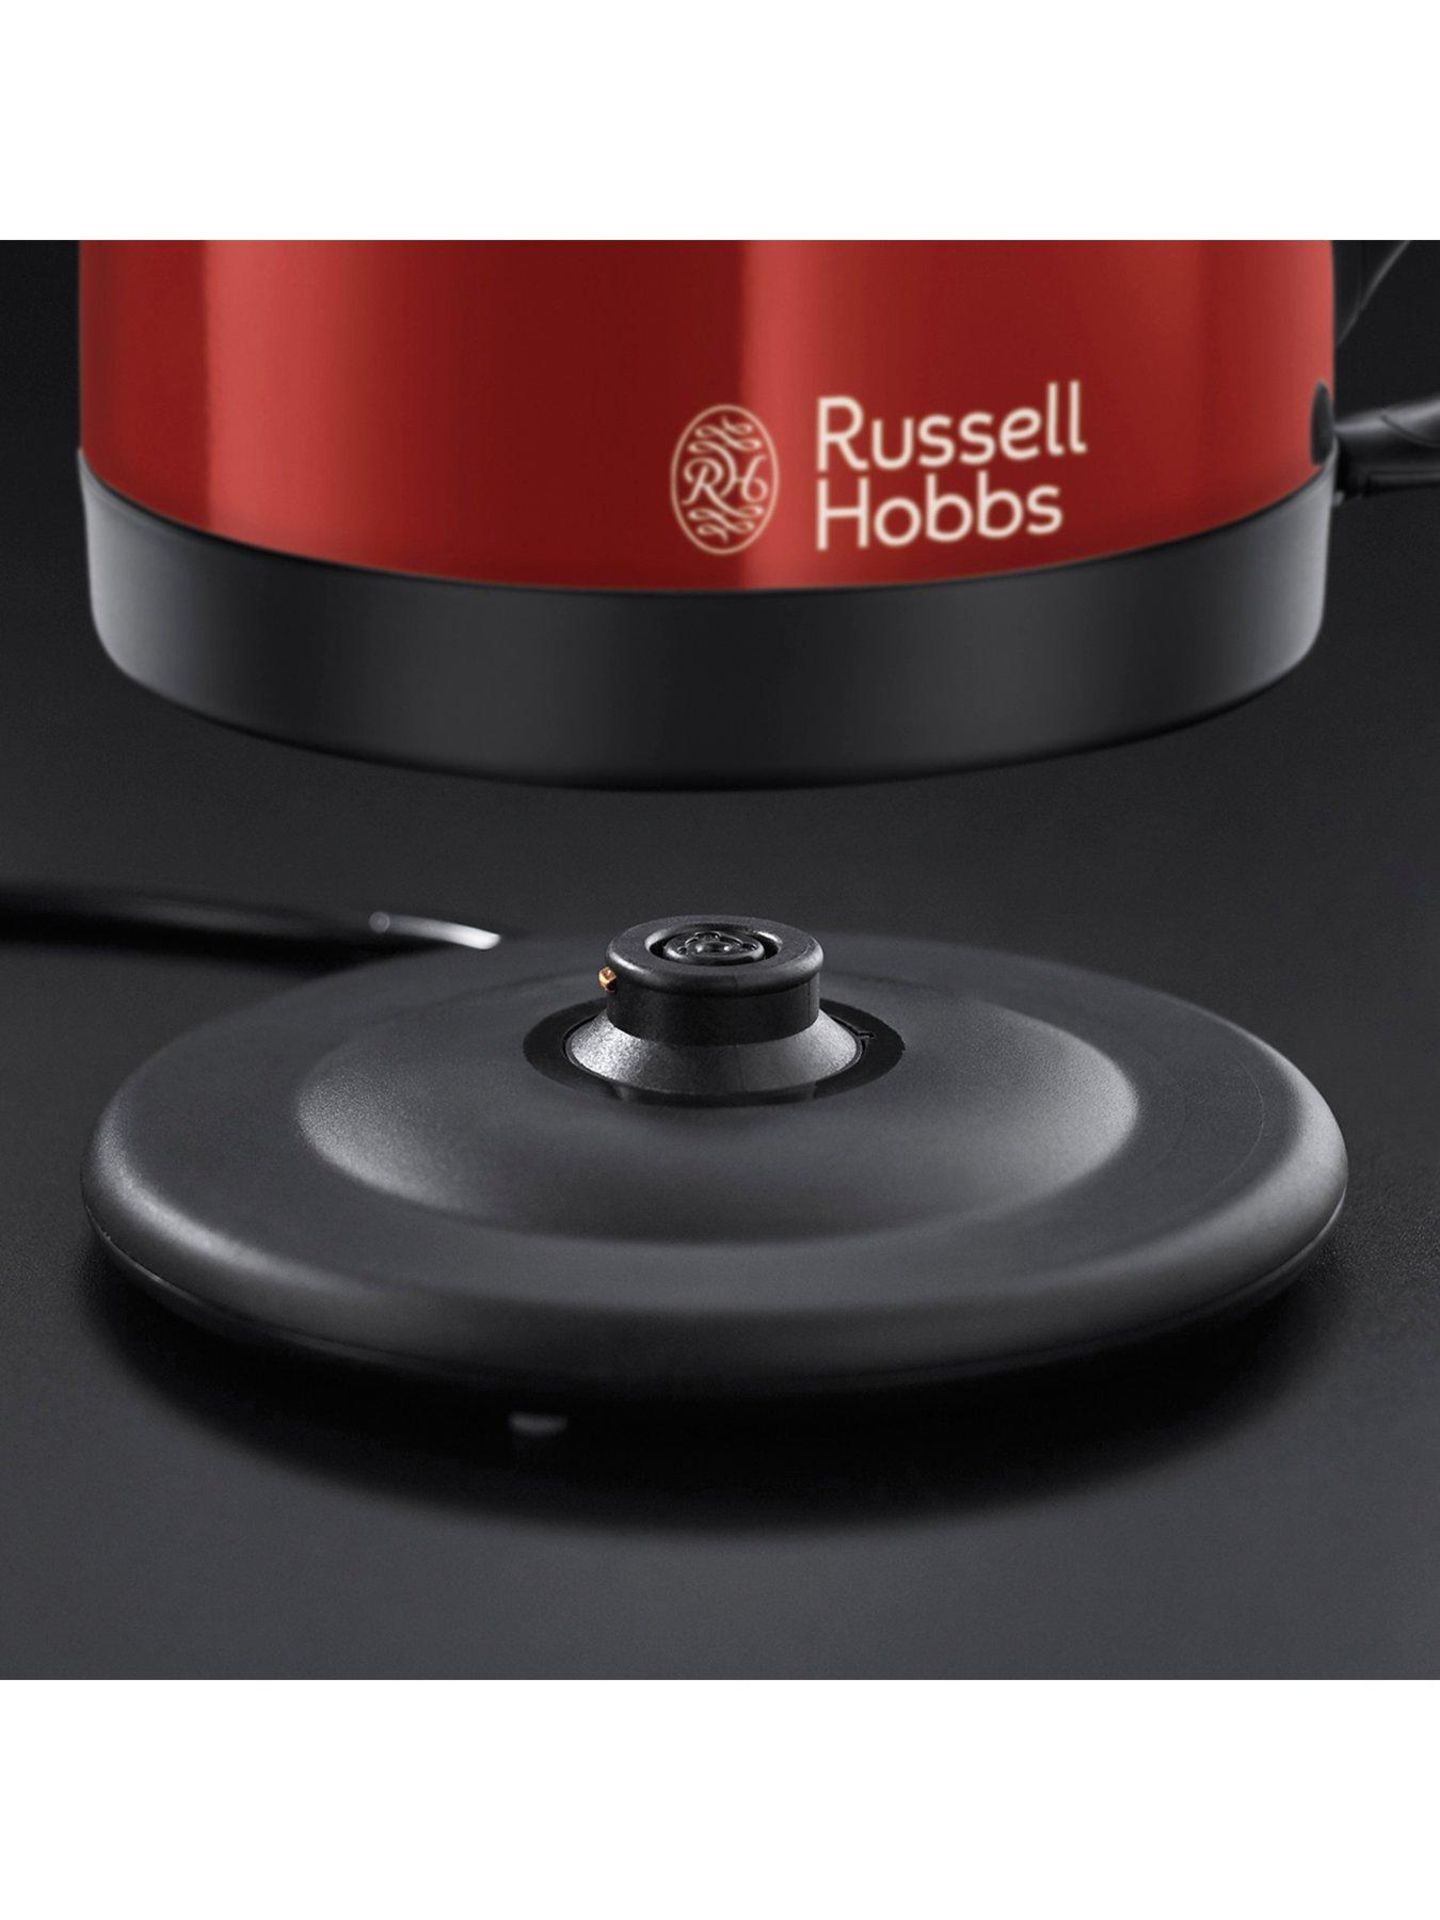 + VAT Brand New Russel Hobbs Red Dorchester Kettle - Perfect Pour - Saves Up To 70% Energy - - Image 3 of 5